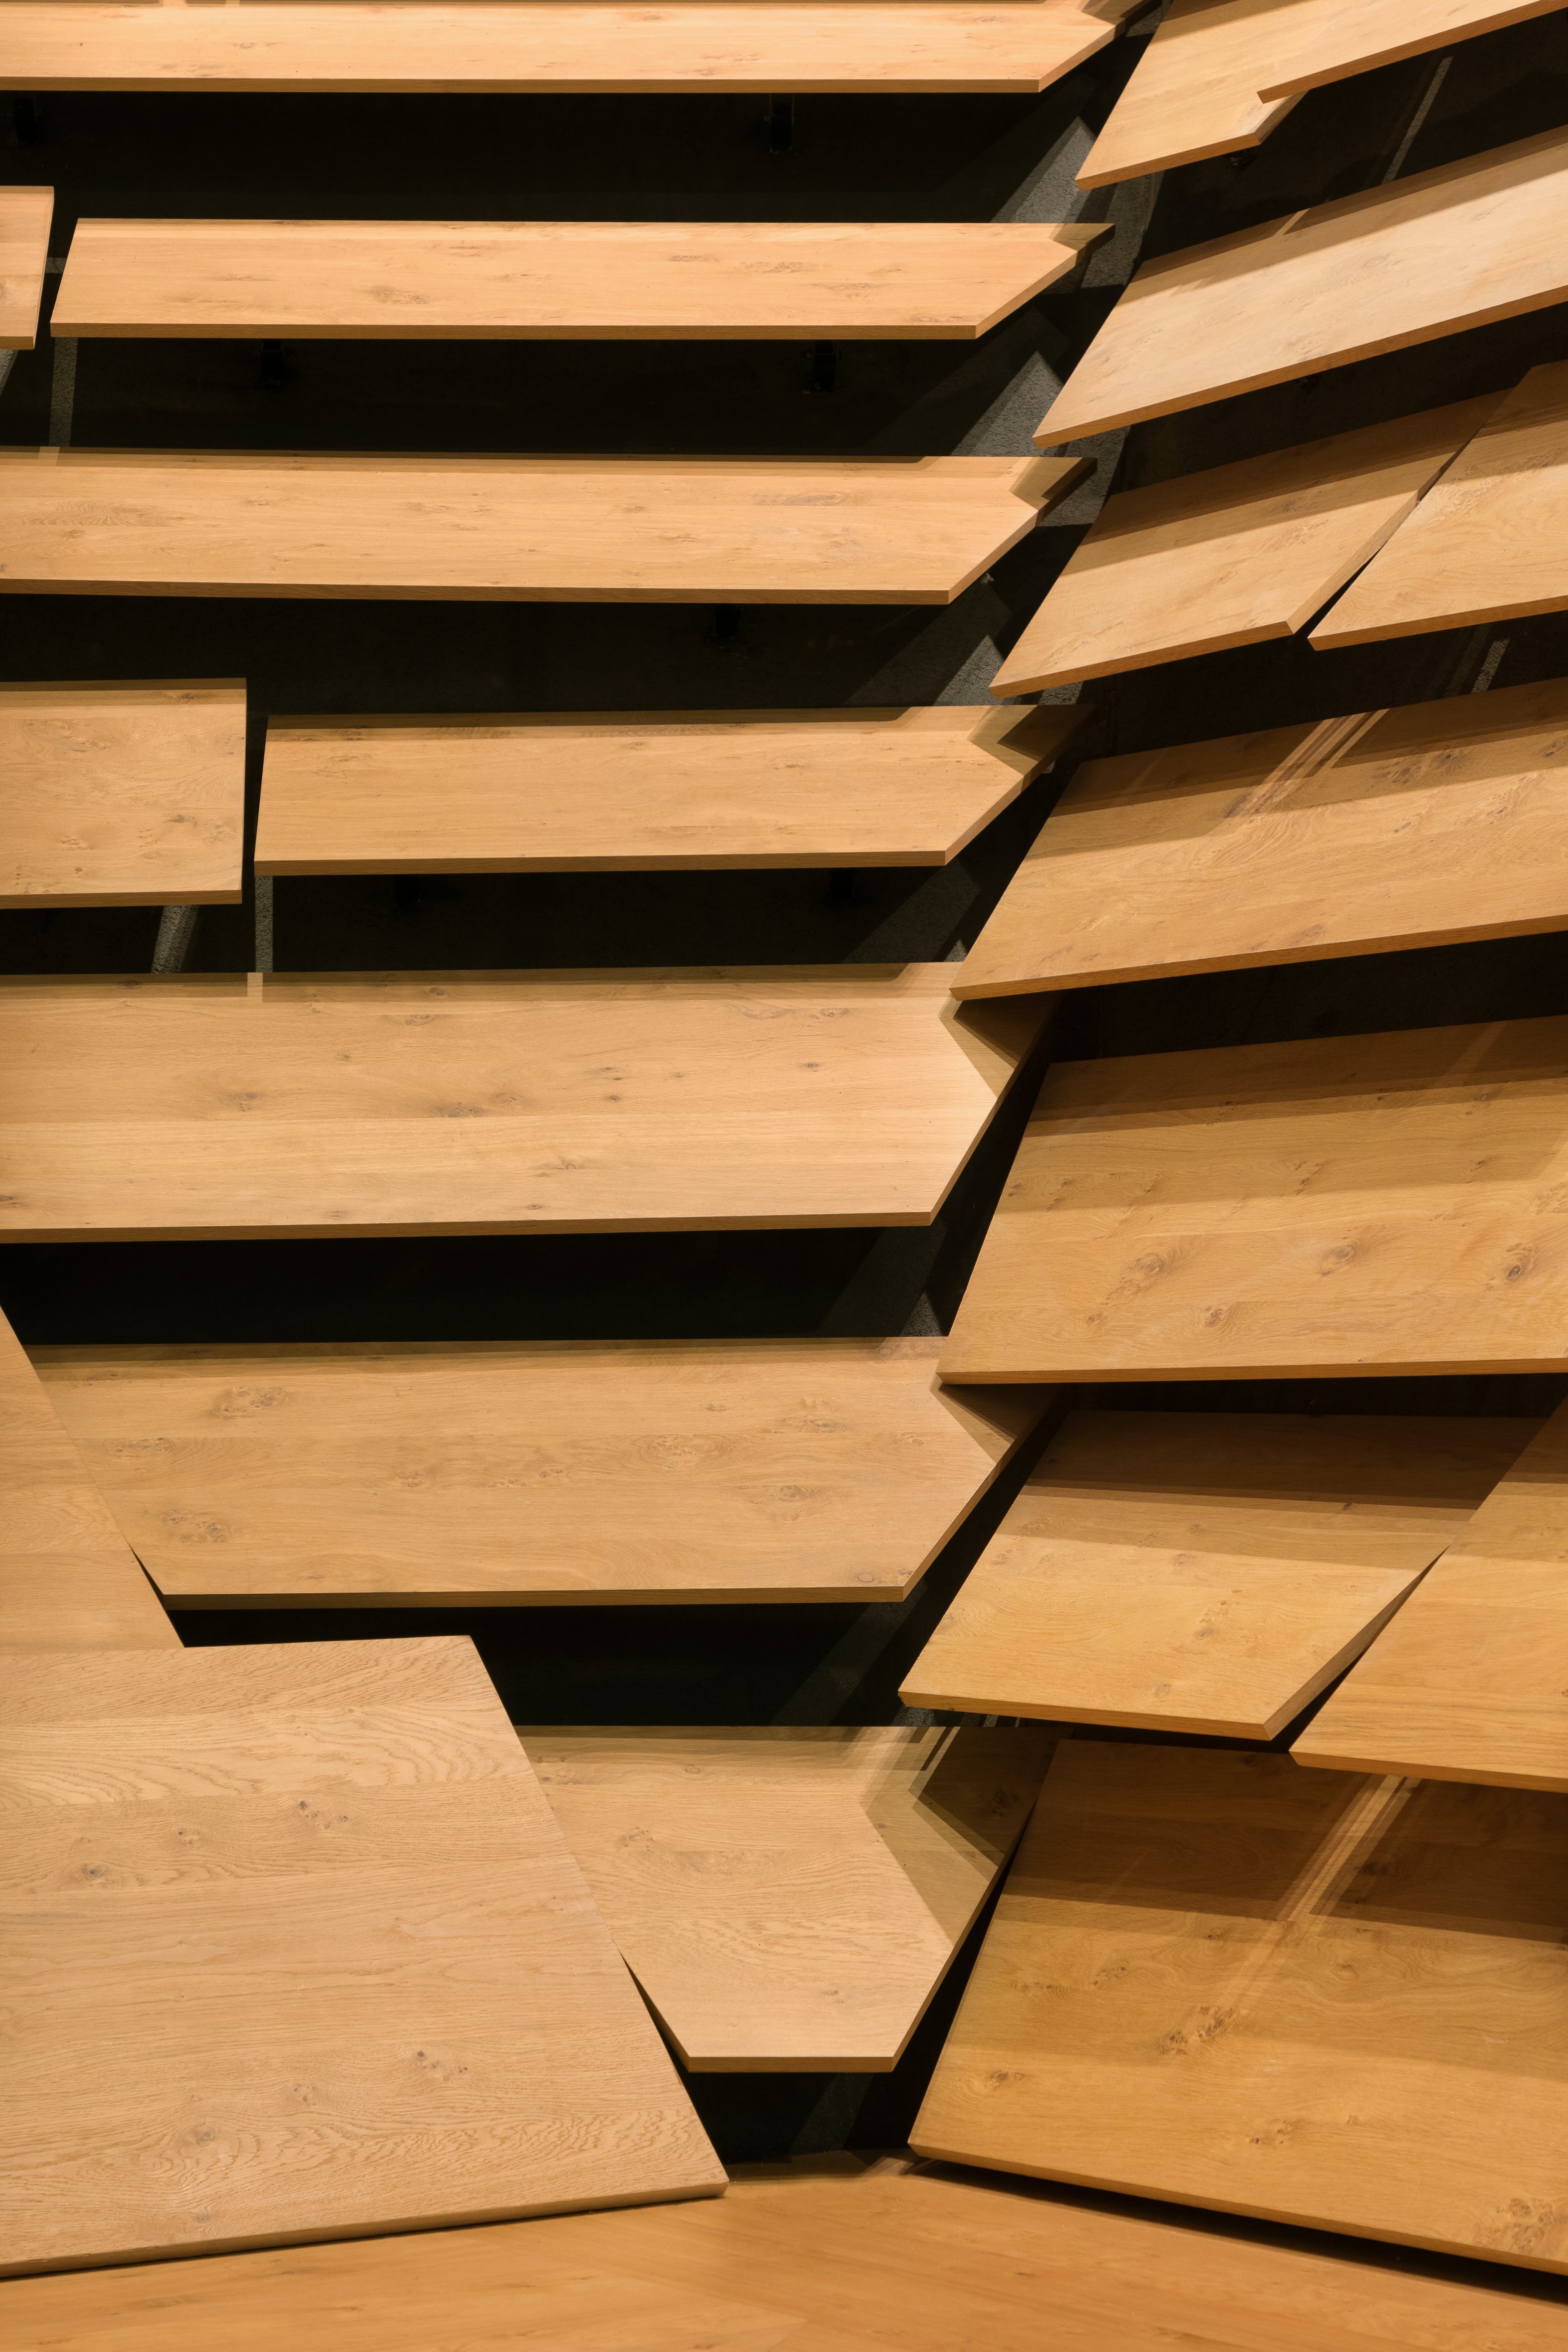 A corner section of interior wooden cladding within V&A Dundee